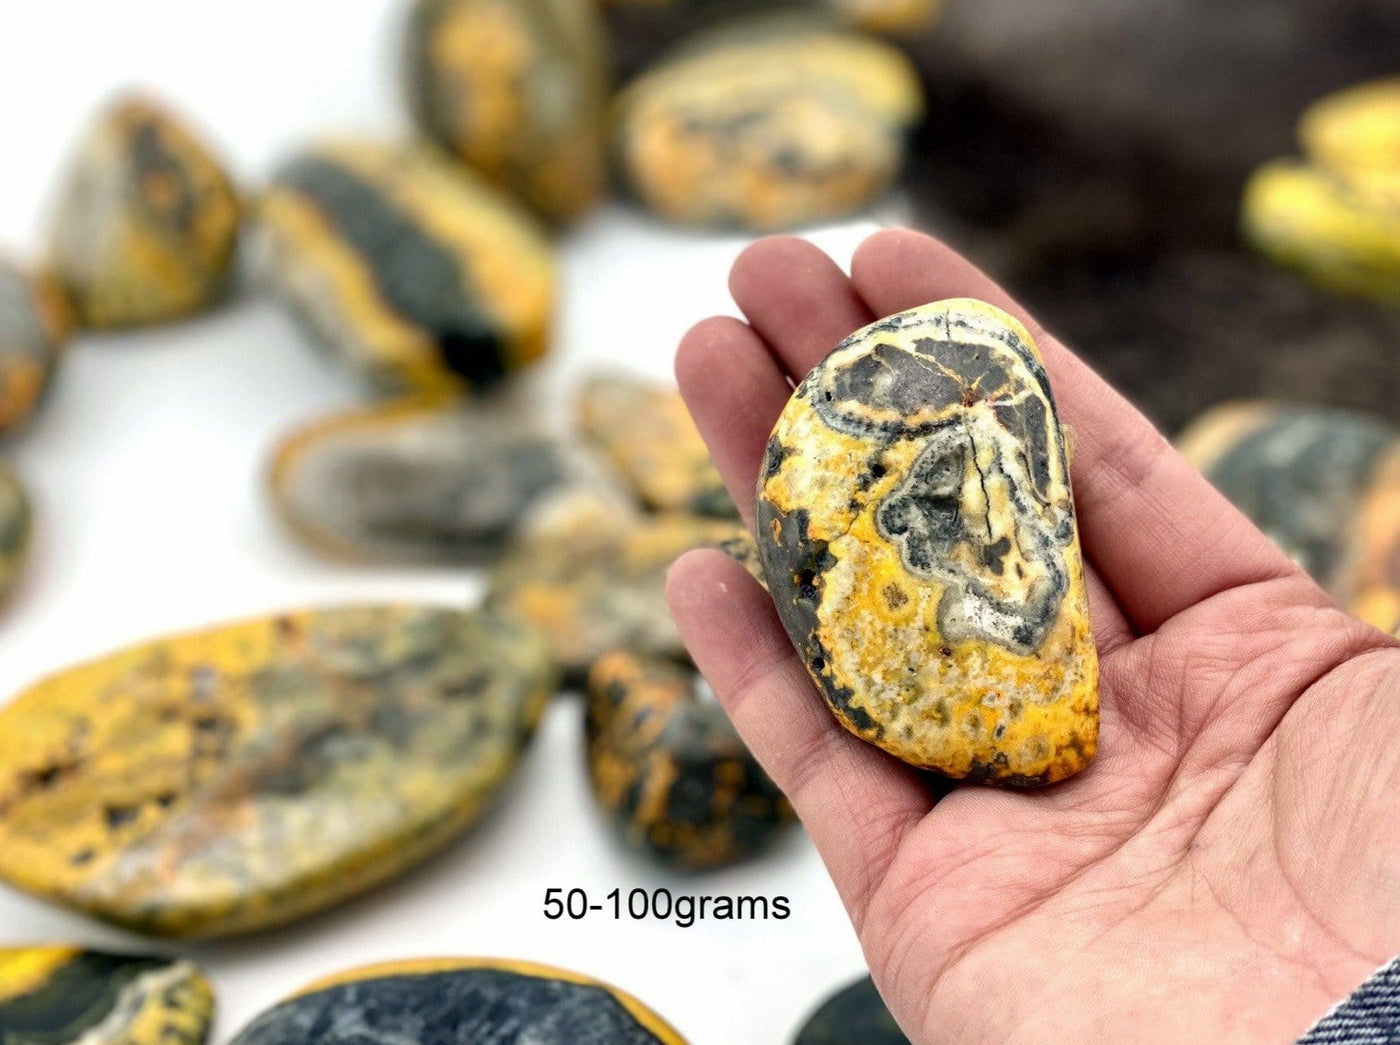 bumble bee jasper available in under 50-100 grams